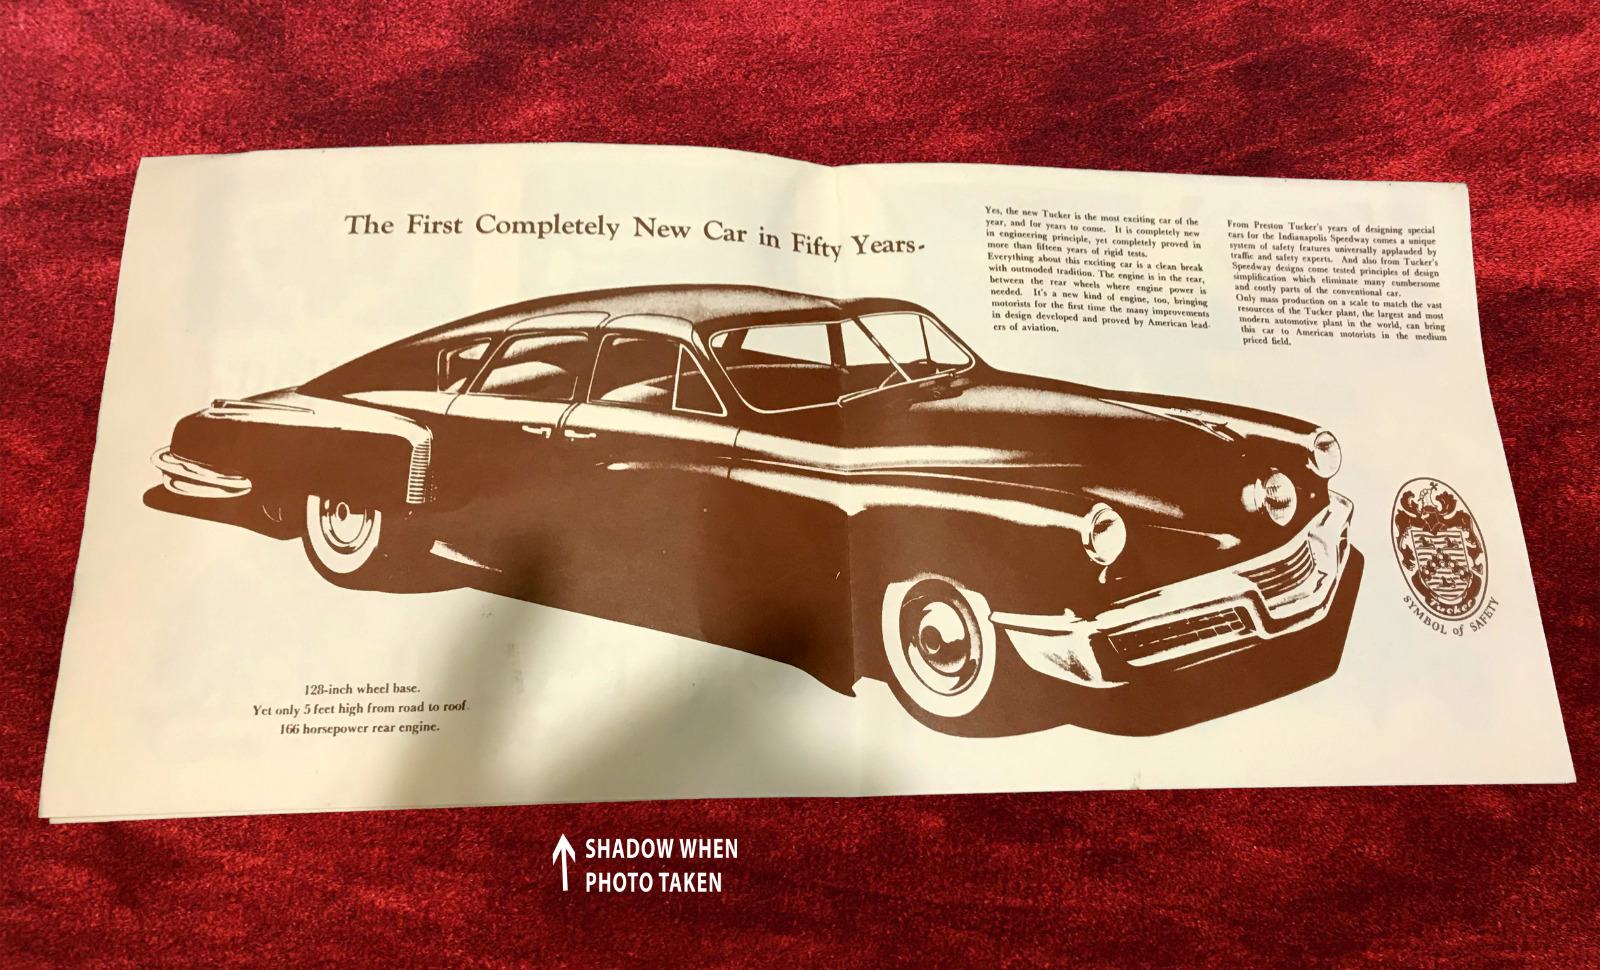 The Tucker '48 Motor Car Sales Brochure The 1st Completely New Car In 50 Years